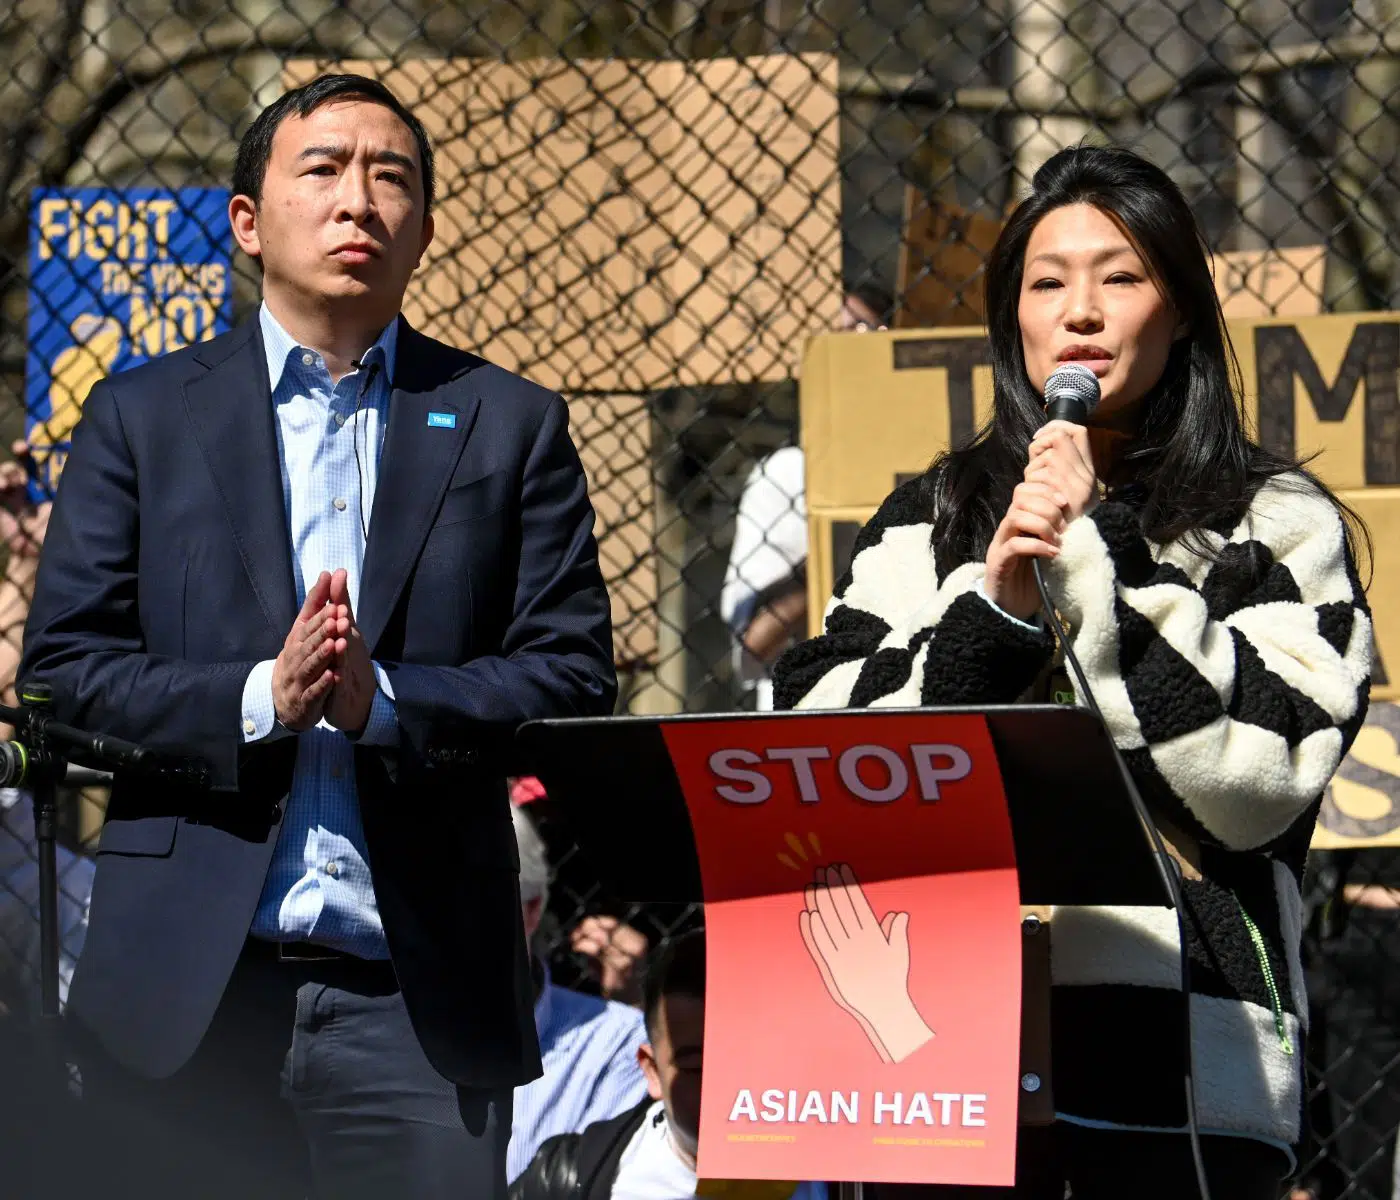 Andrew Yang and wife Evelyn Yang